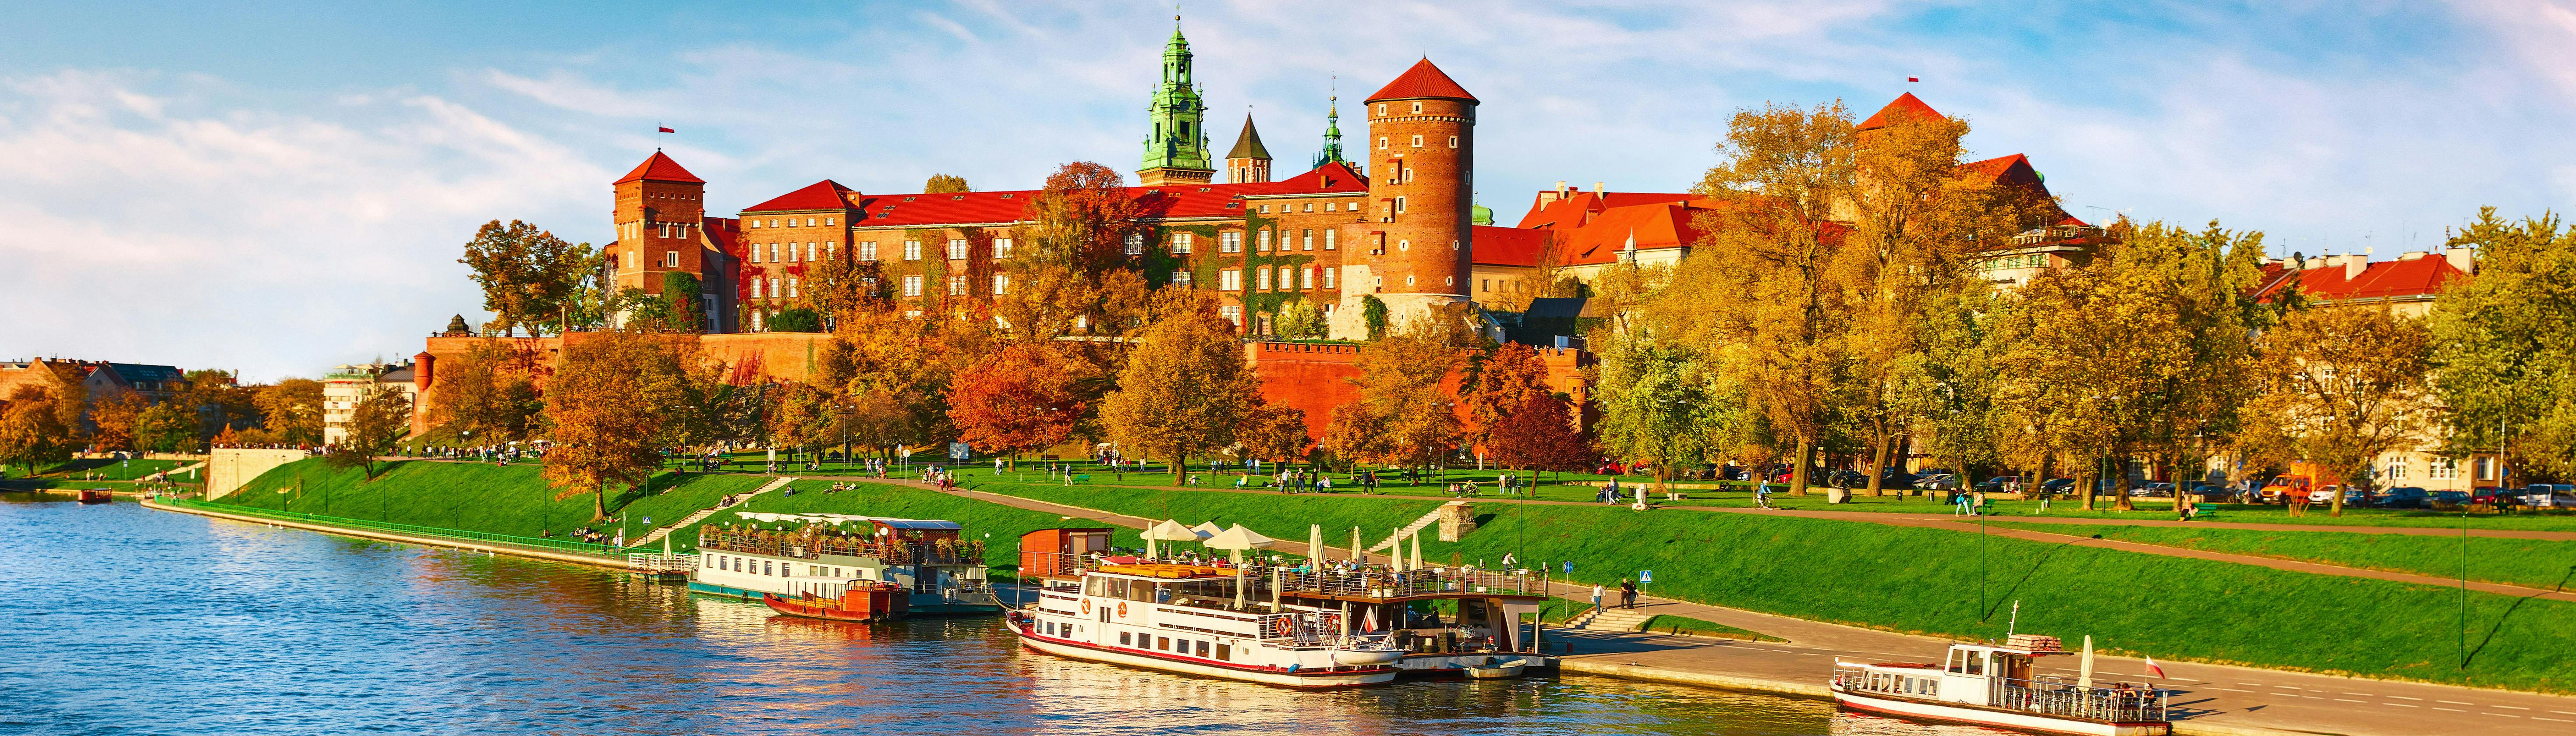 Study in Poland: Fees and Living Costs - MastersPortal.com